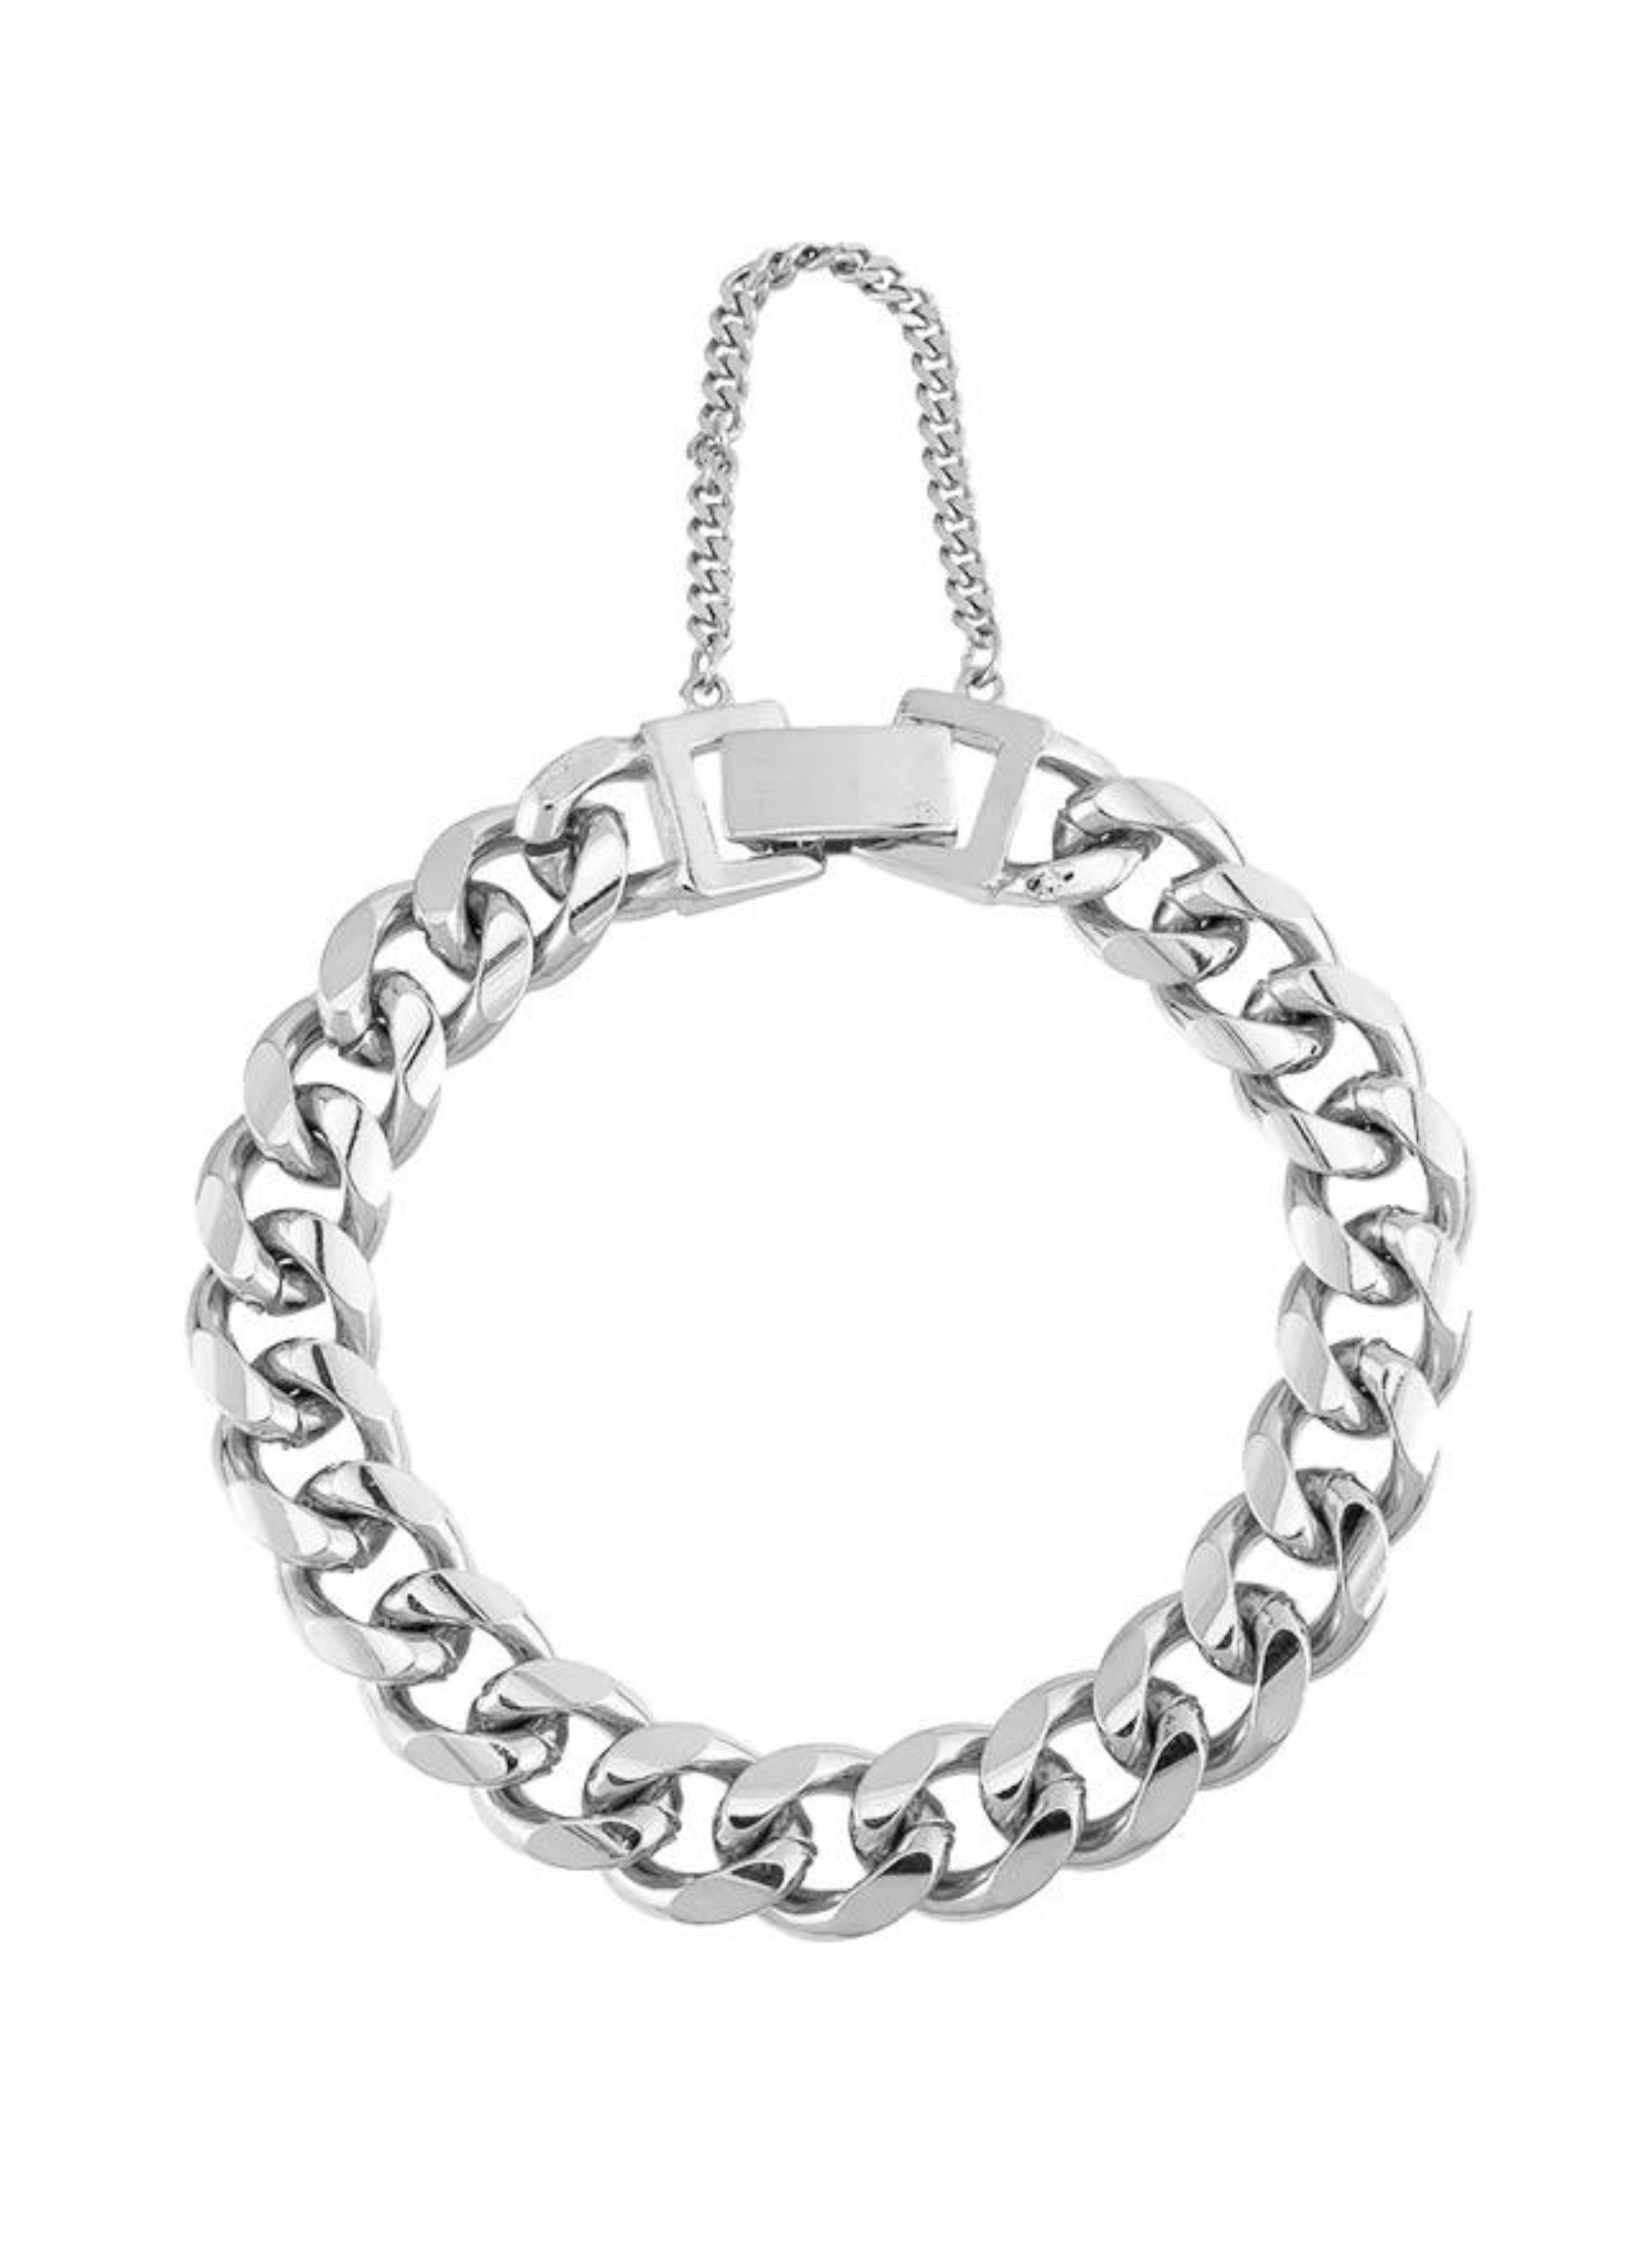 Colette bracelet in silver from Jolie and Deen